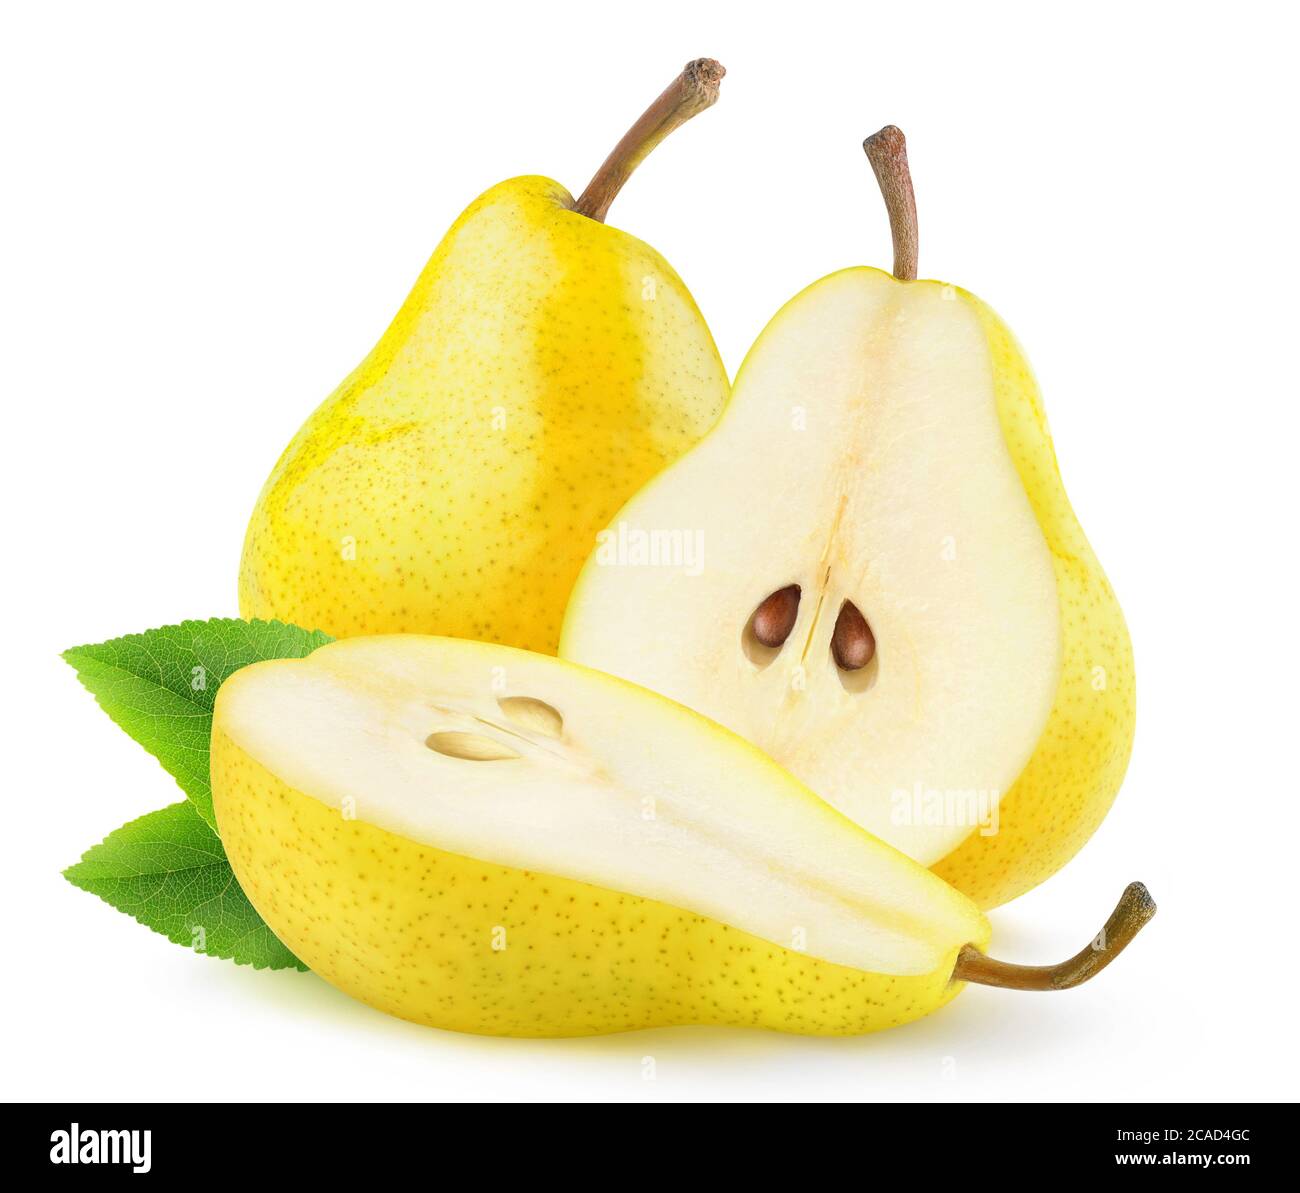 Isolated yellow pears. One whole pear fruit and one cut in half isolated on white background Stock Photo